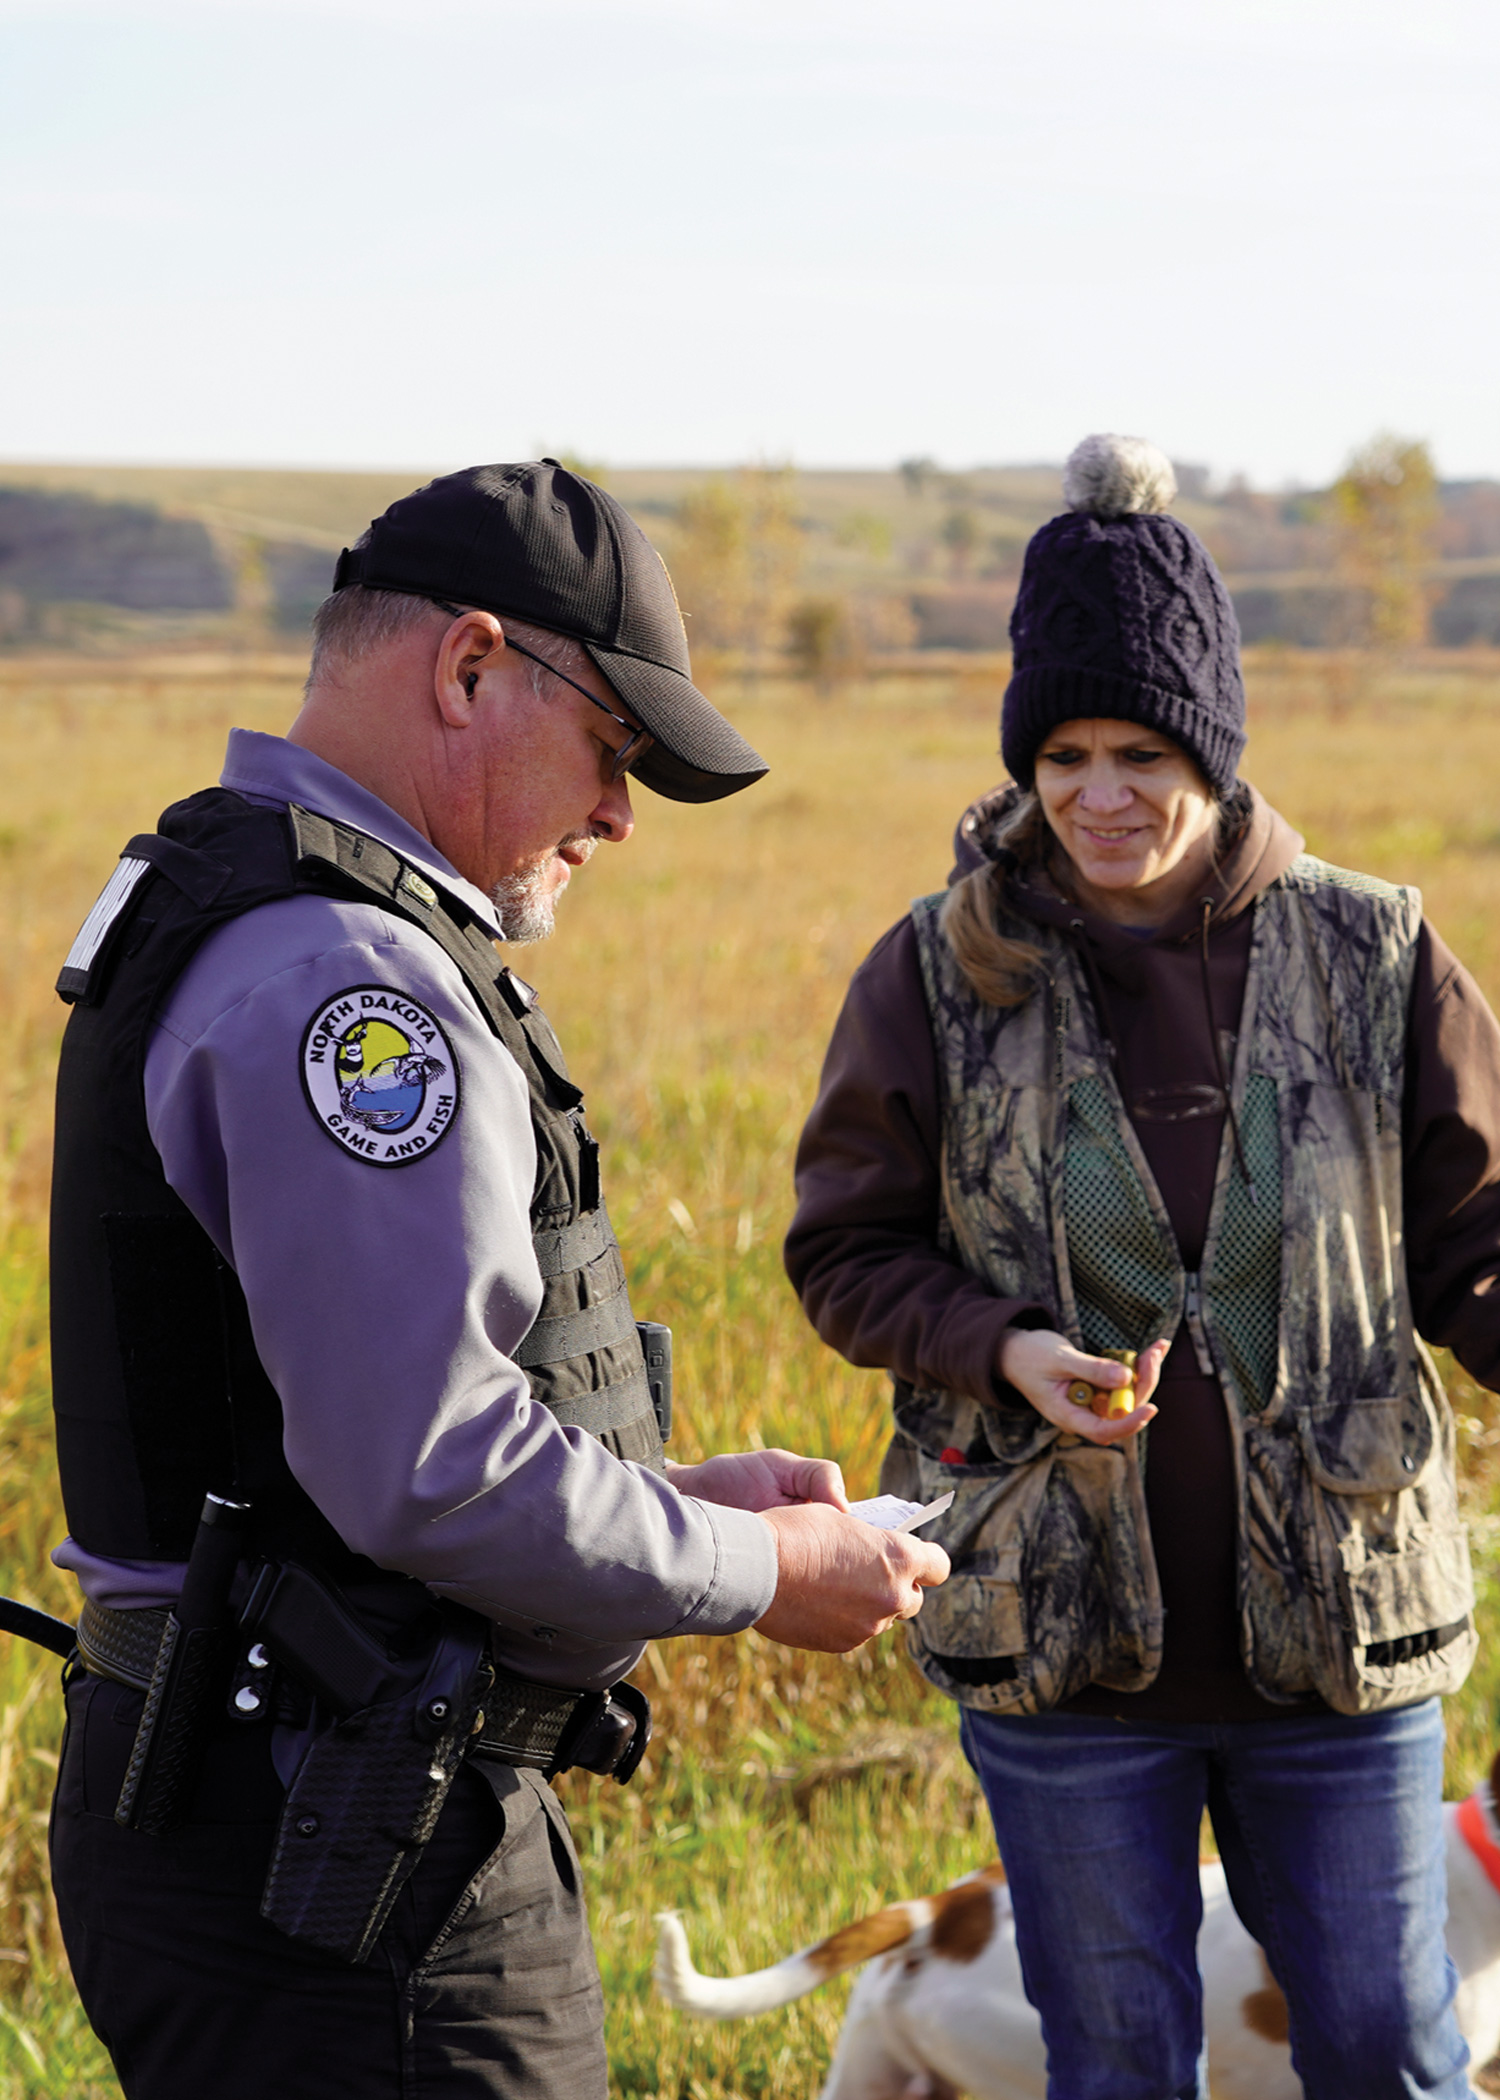 Game warden checking an hunter's harvest